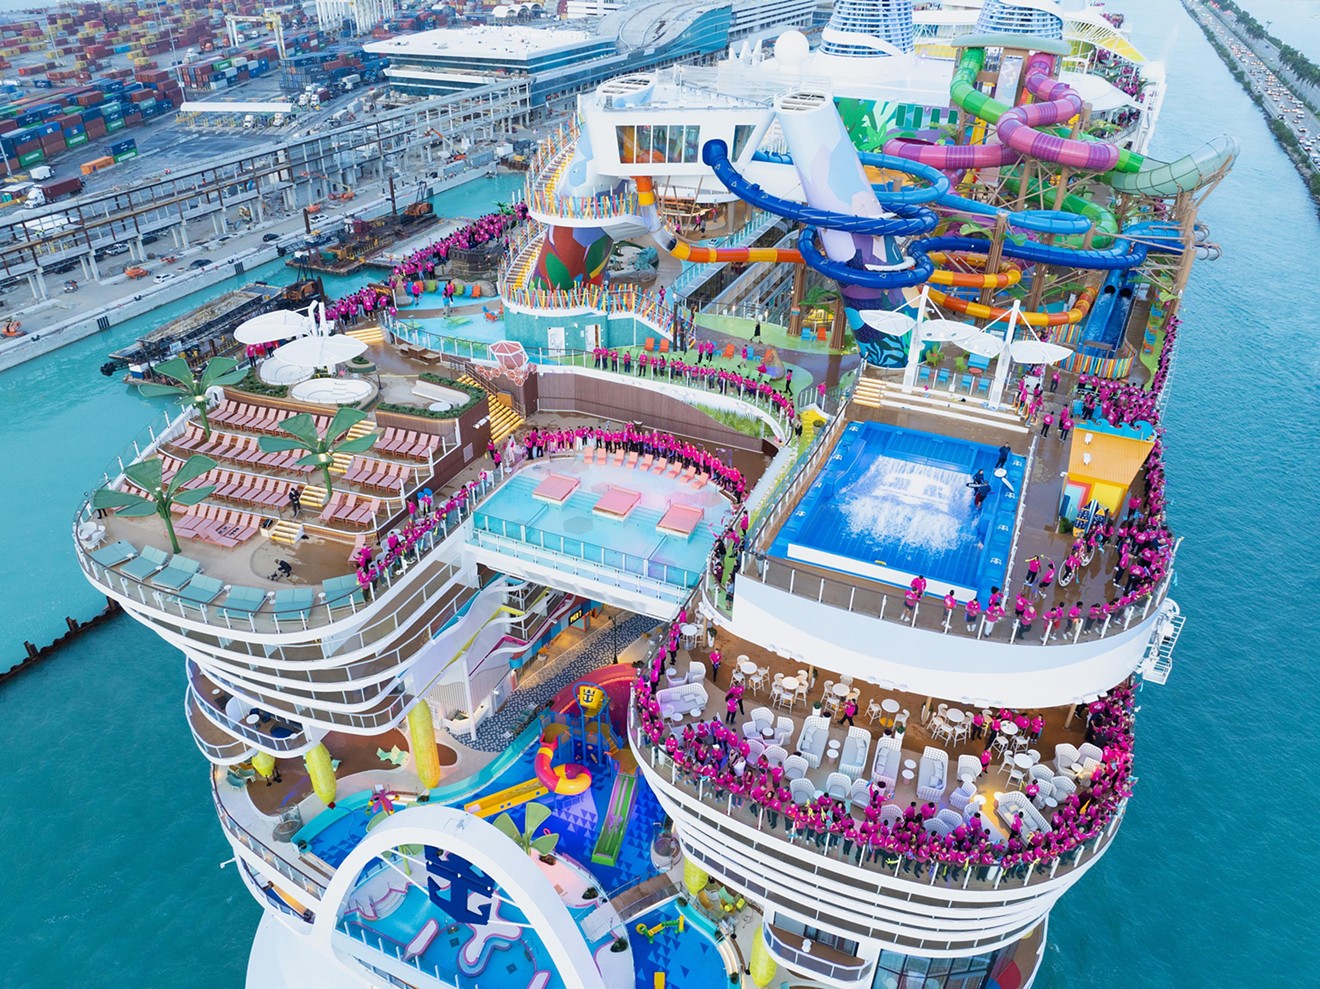 With the highest passenger capacity of any cruise ship on the planet, it stands to reason Icon of the Seas could produce record levels of passenger excrement.